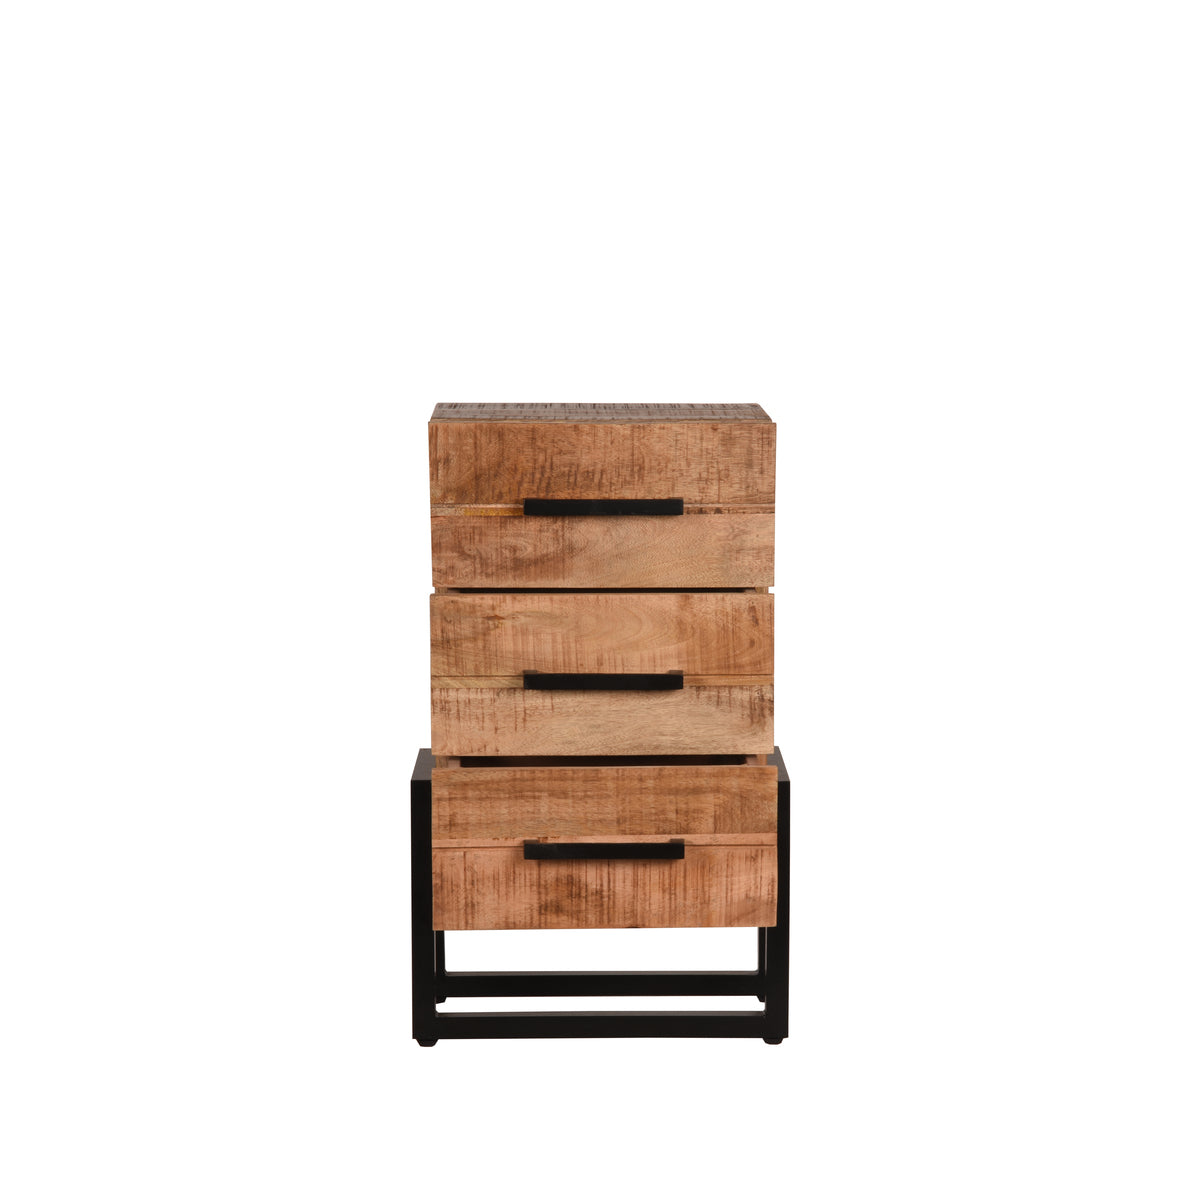 LABEL51 Chest of drawers Bolivia - Rough - Mango wood